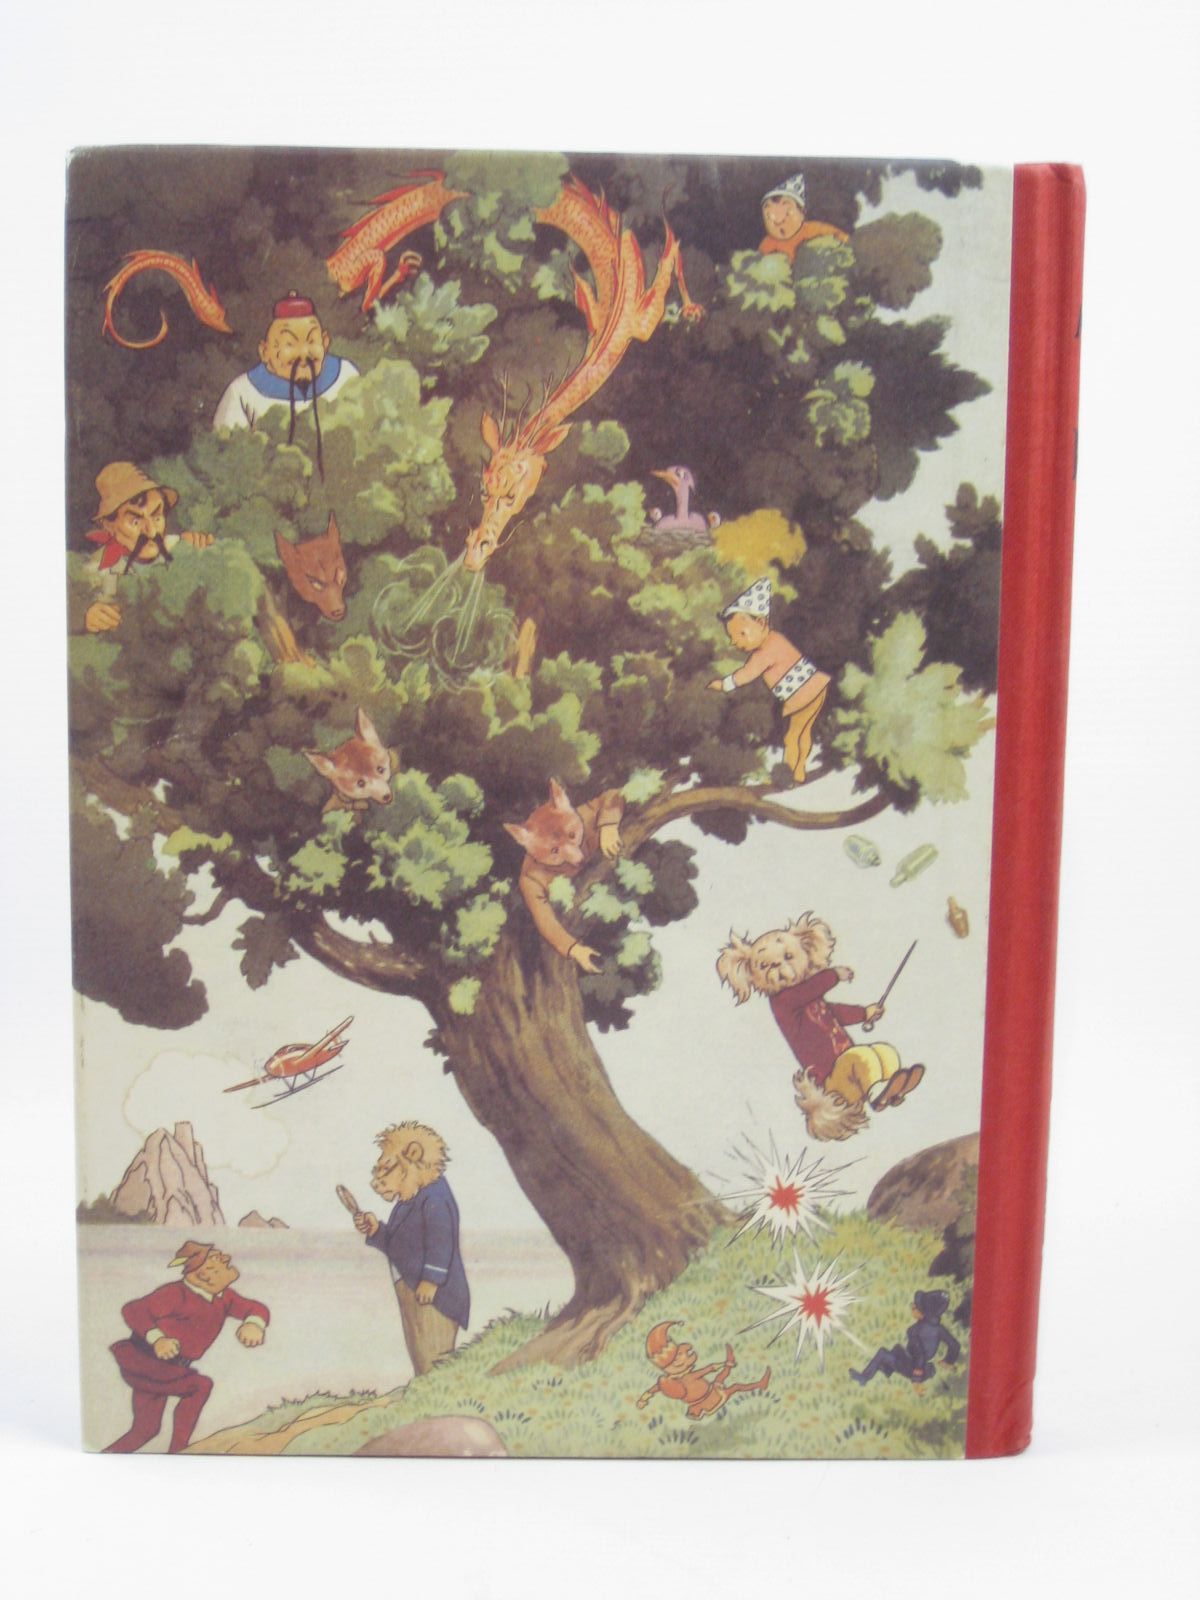 Photo of RUPERT ANNUAL 1937 (FACSIMILE) - MORE ADVENTURES OF RUPERT written by Bestall, Alfred illustrated by Bestall, Alfred published by Express Newspapers Ltd. (STOCK CODE: 1406164)  for sale by Stella & Rose's Books